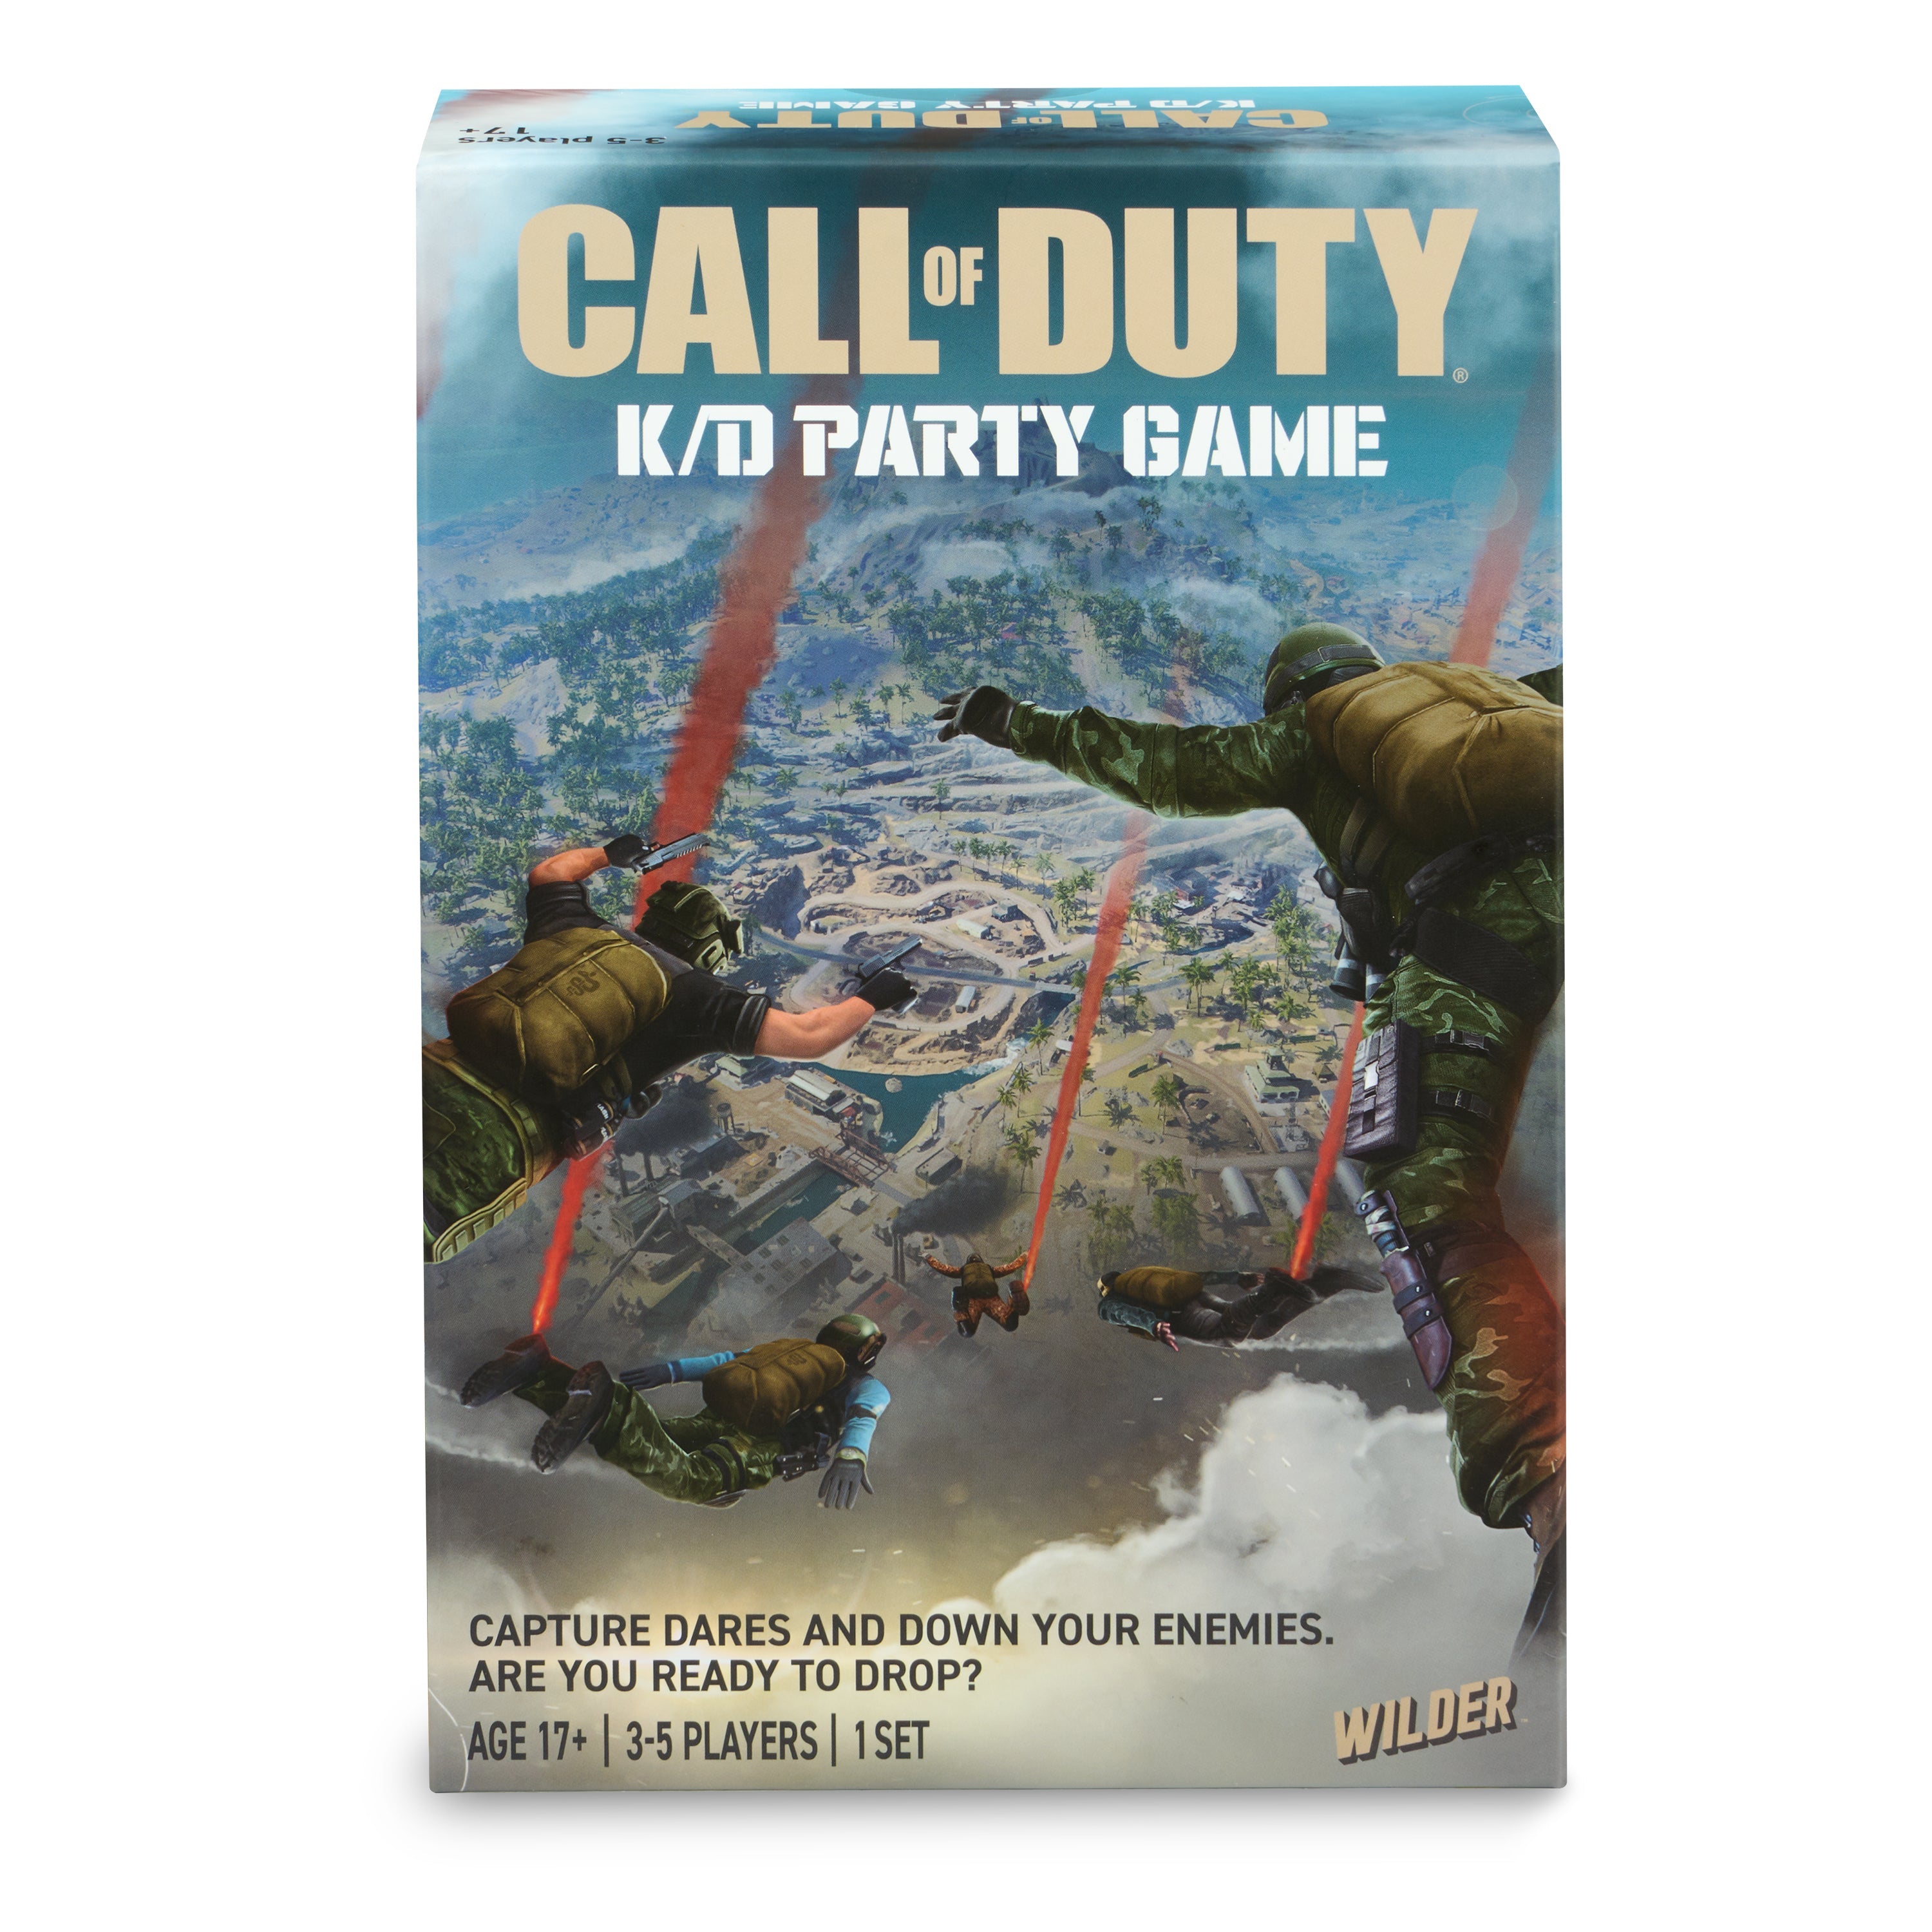 Call of Duty: K/D Party Game - Party Game Box View